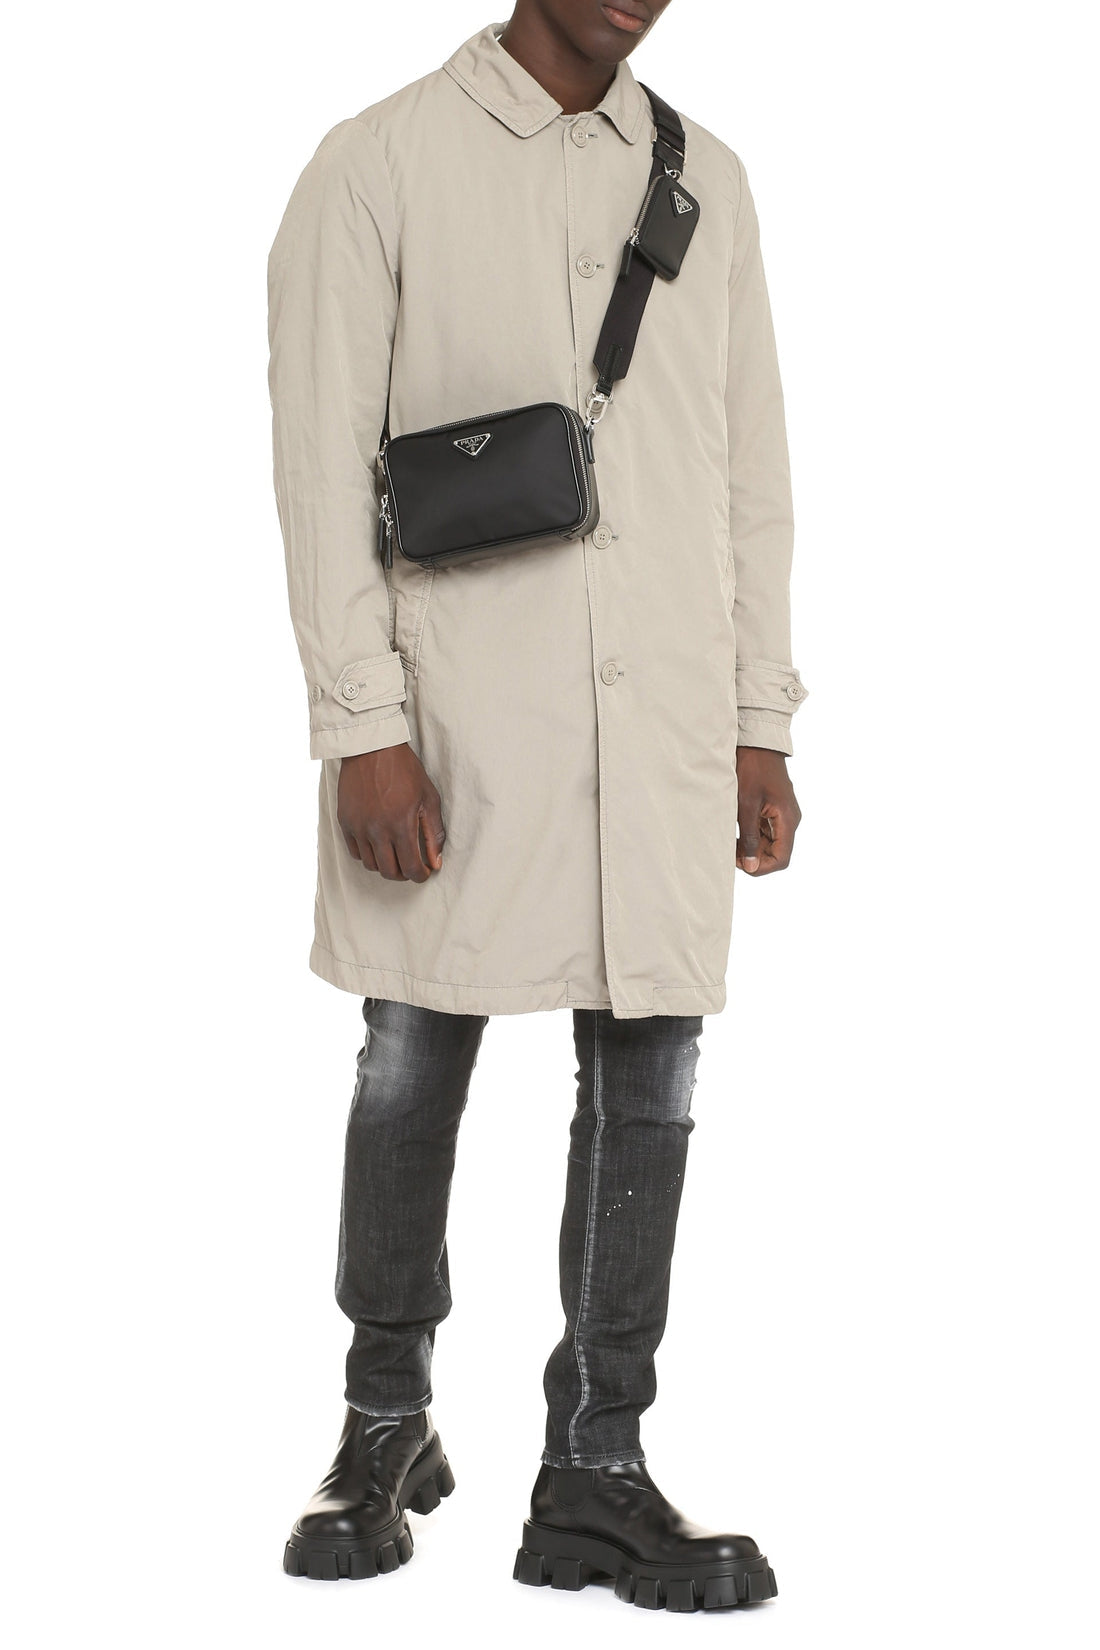 Aspesi-OUTLET-SALE-Trench coat with internal down jacket-ARCHIVIST